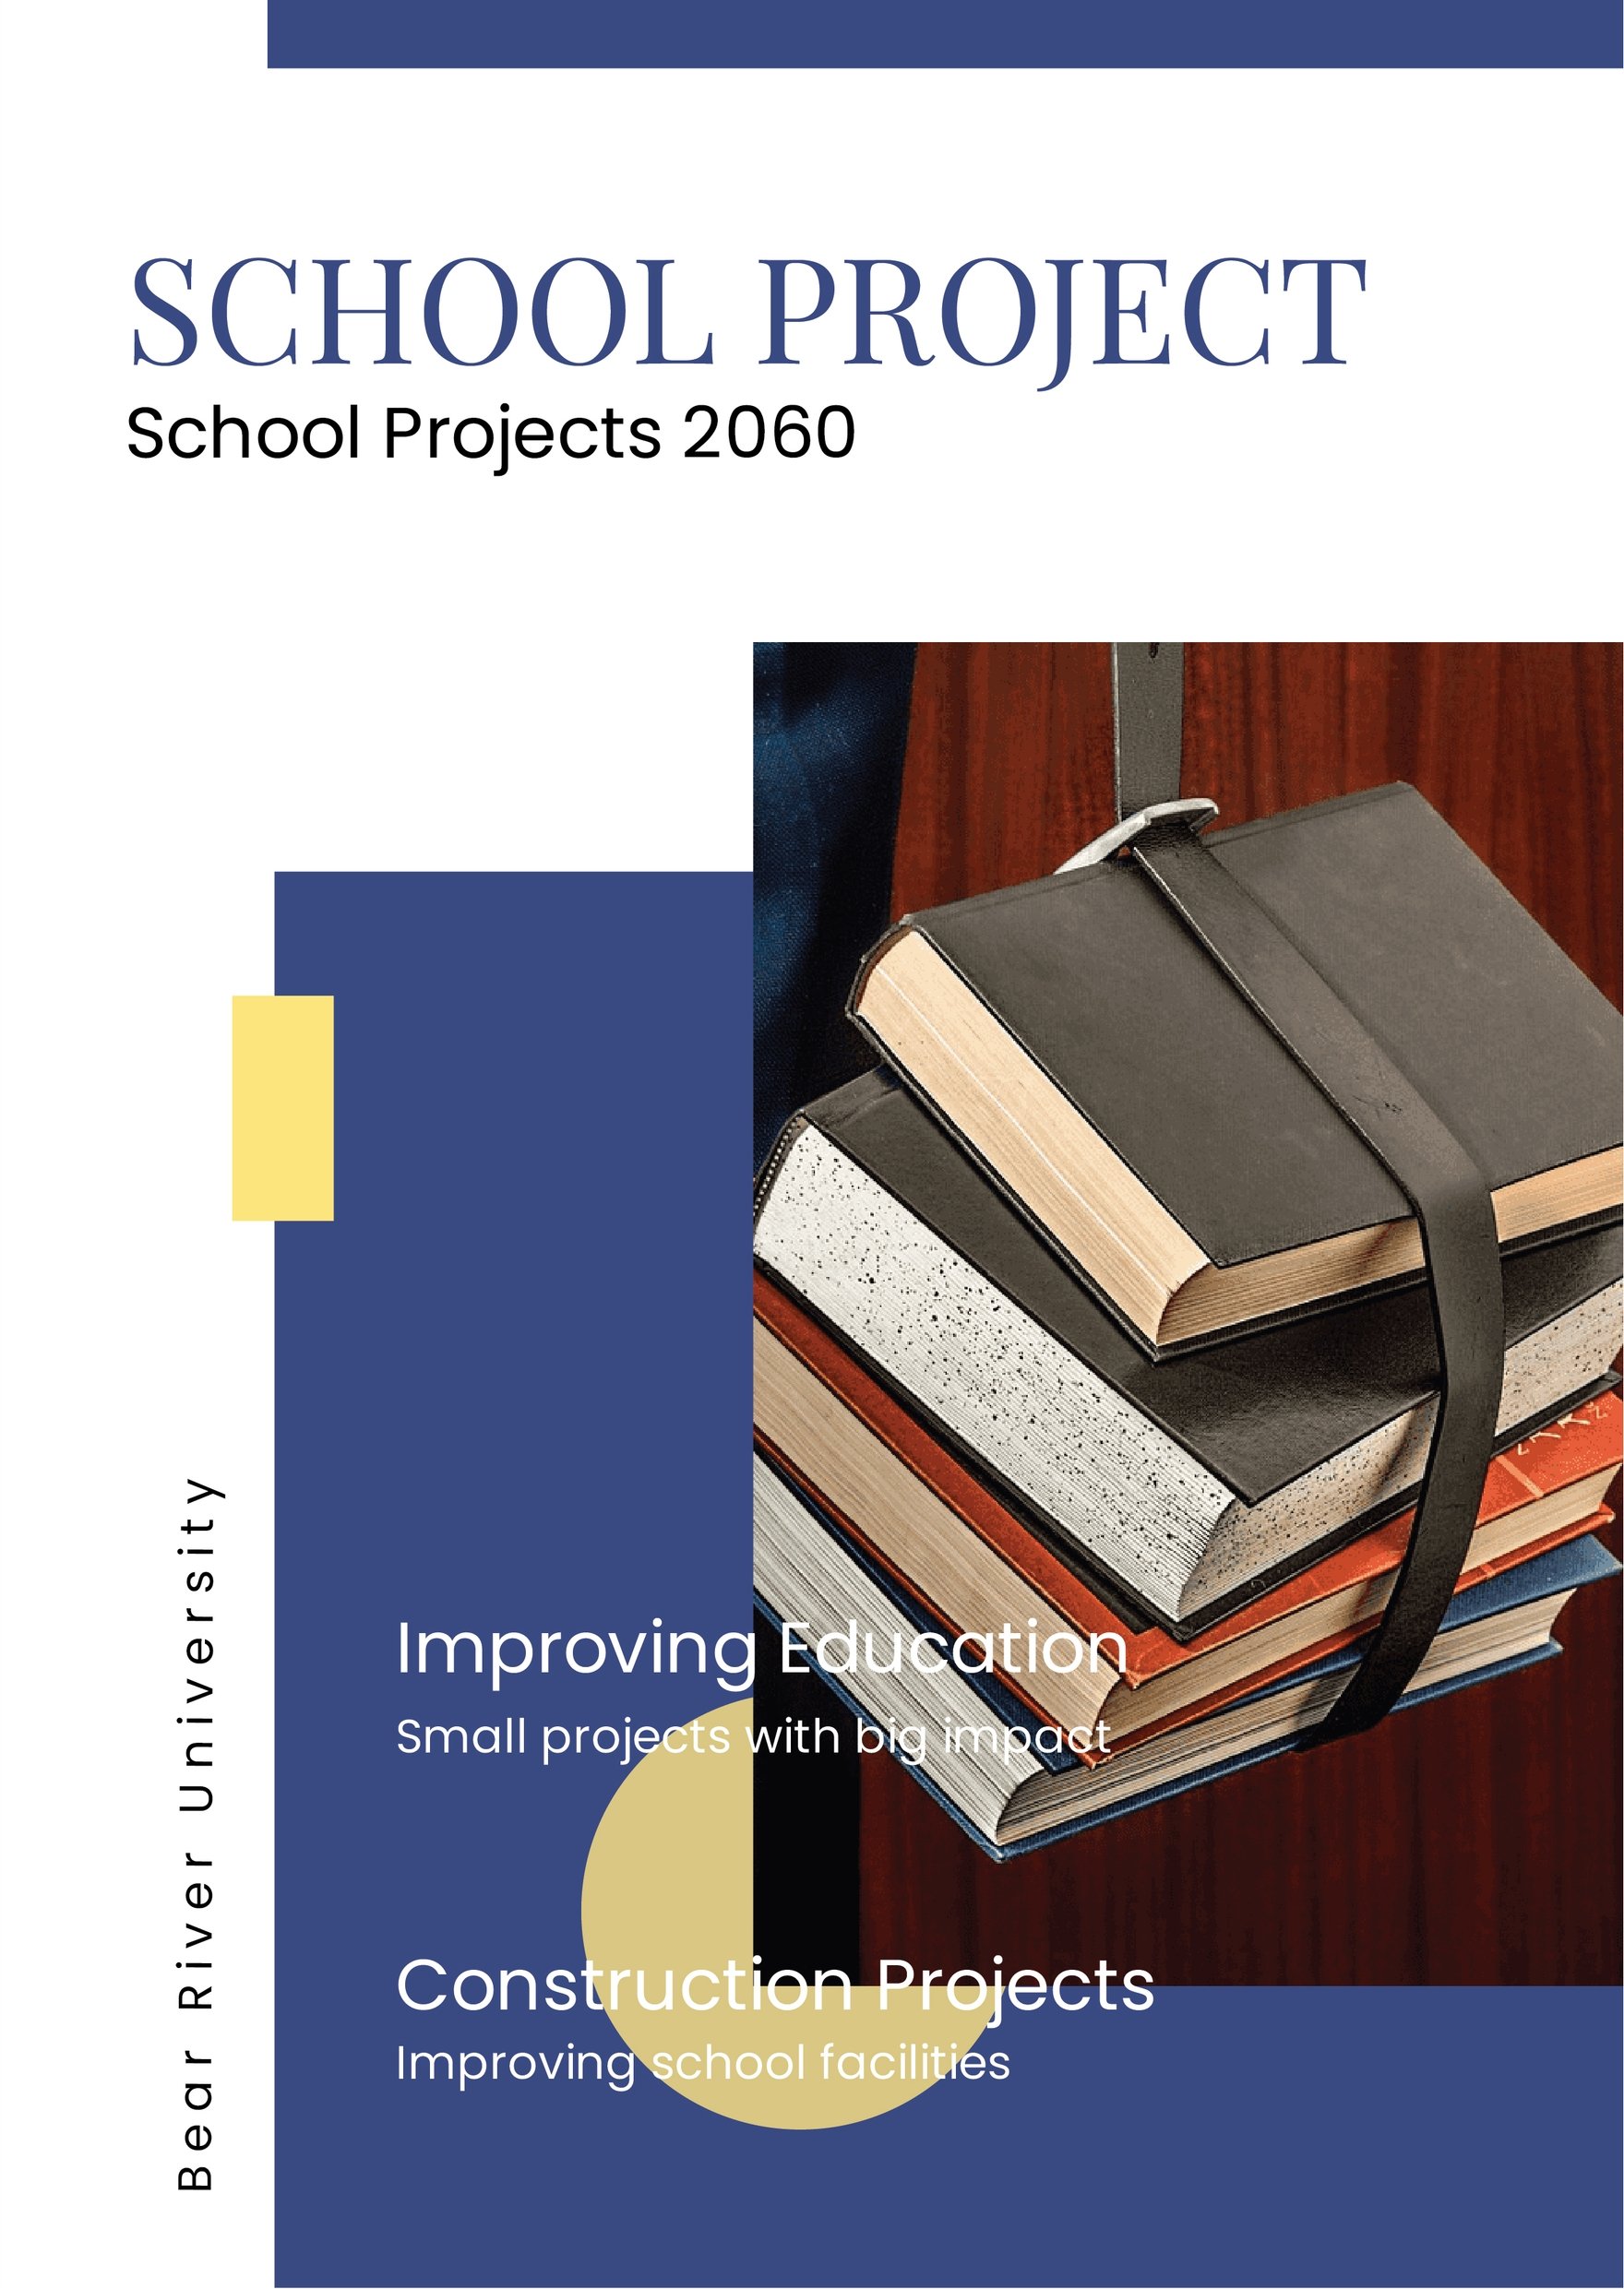 School Project Booklet Template in Word, Google Docs, Illustrator, PSD, Apple Pages, Publisher, InDesign